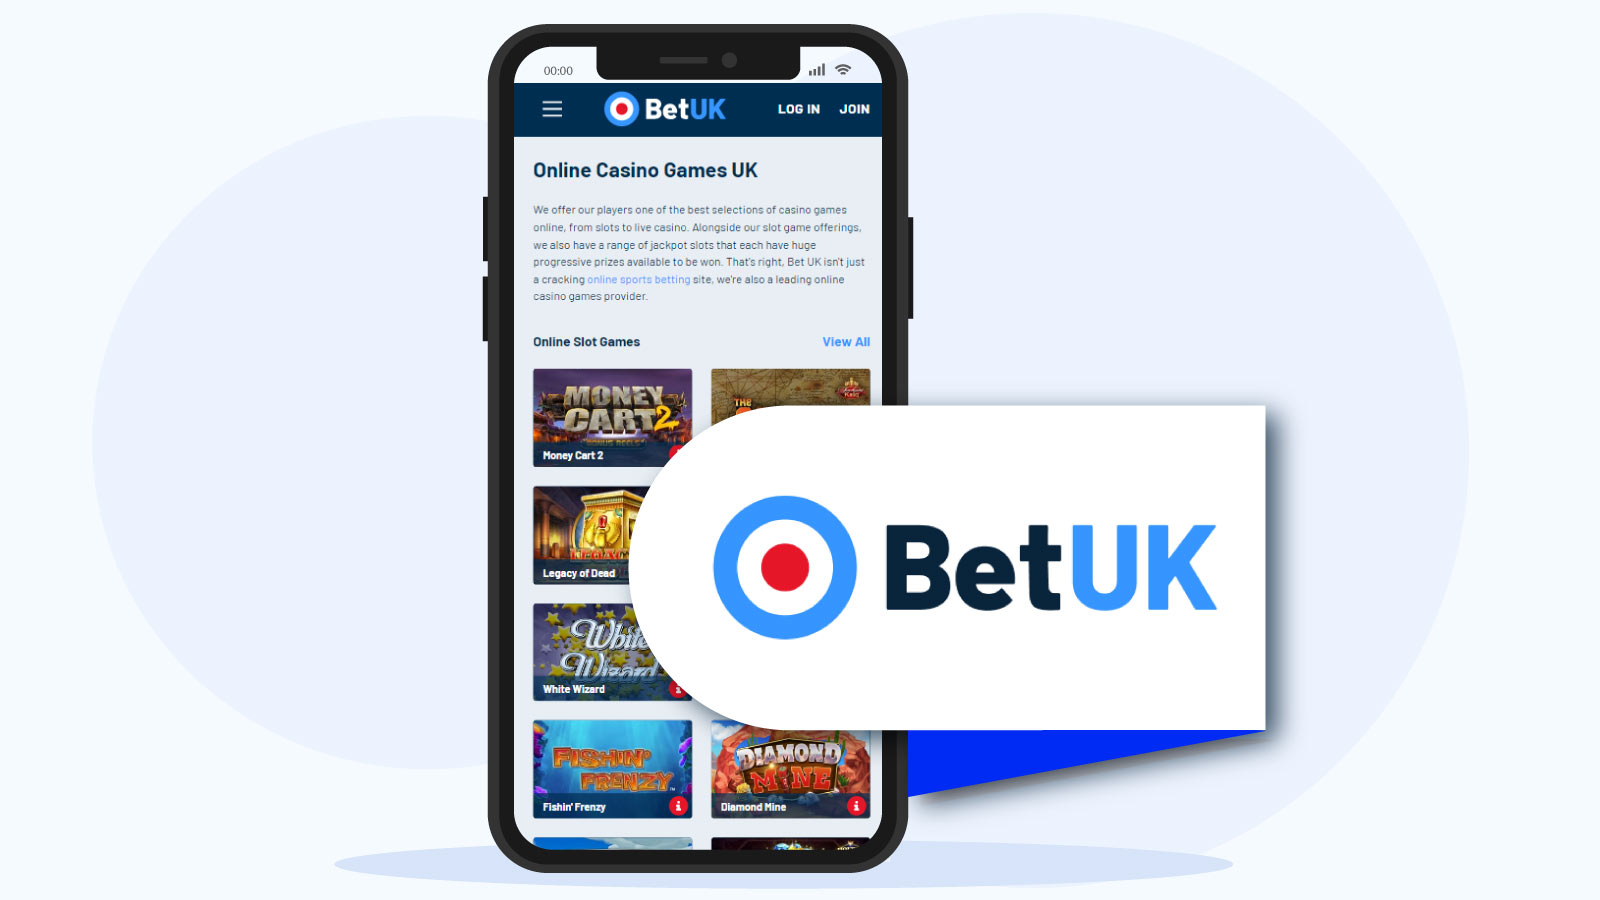 BetUK – Best Apple Pay Casino for Payout Time